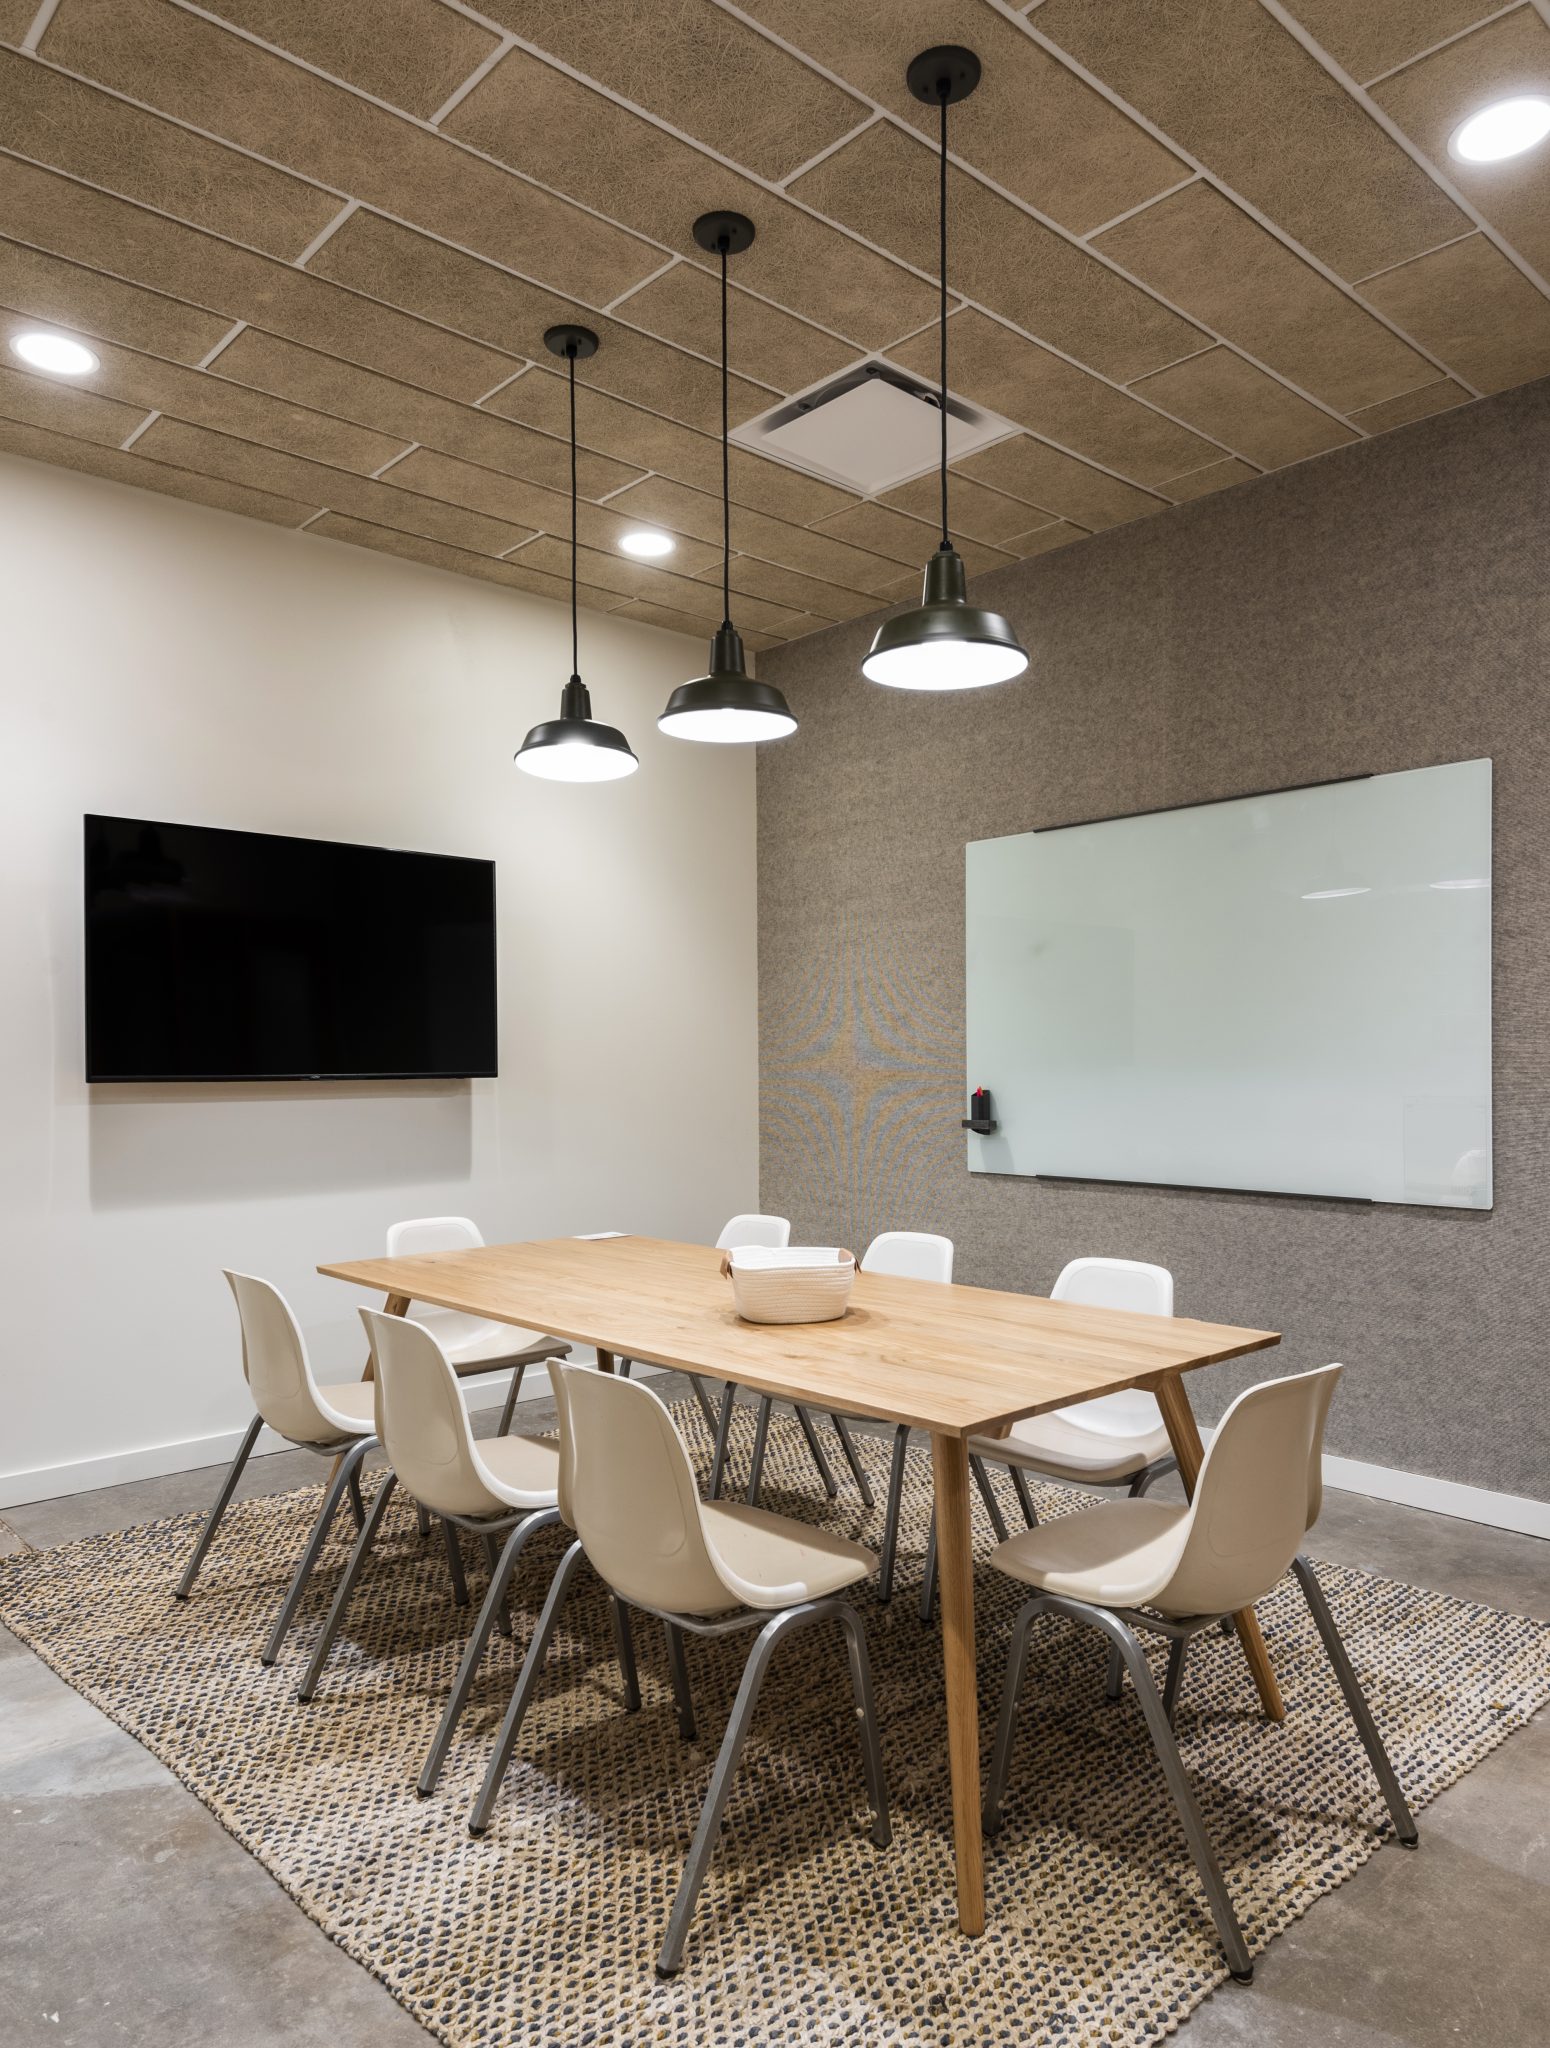 Furnished conference rooms